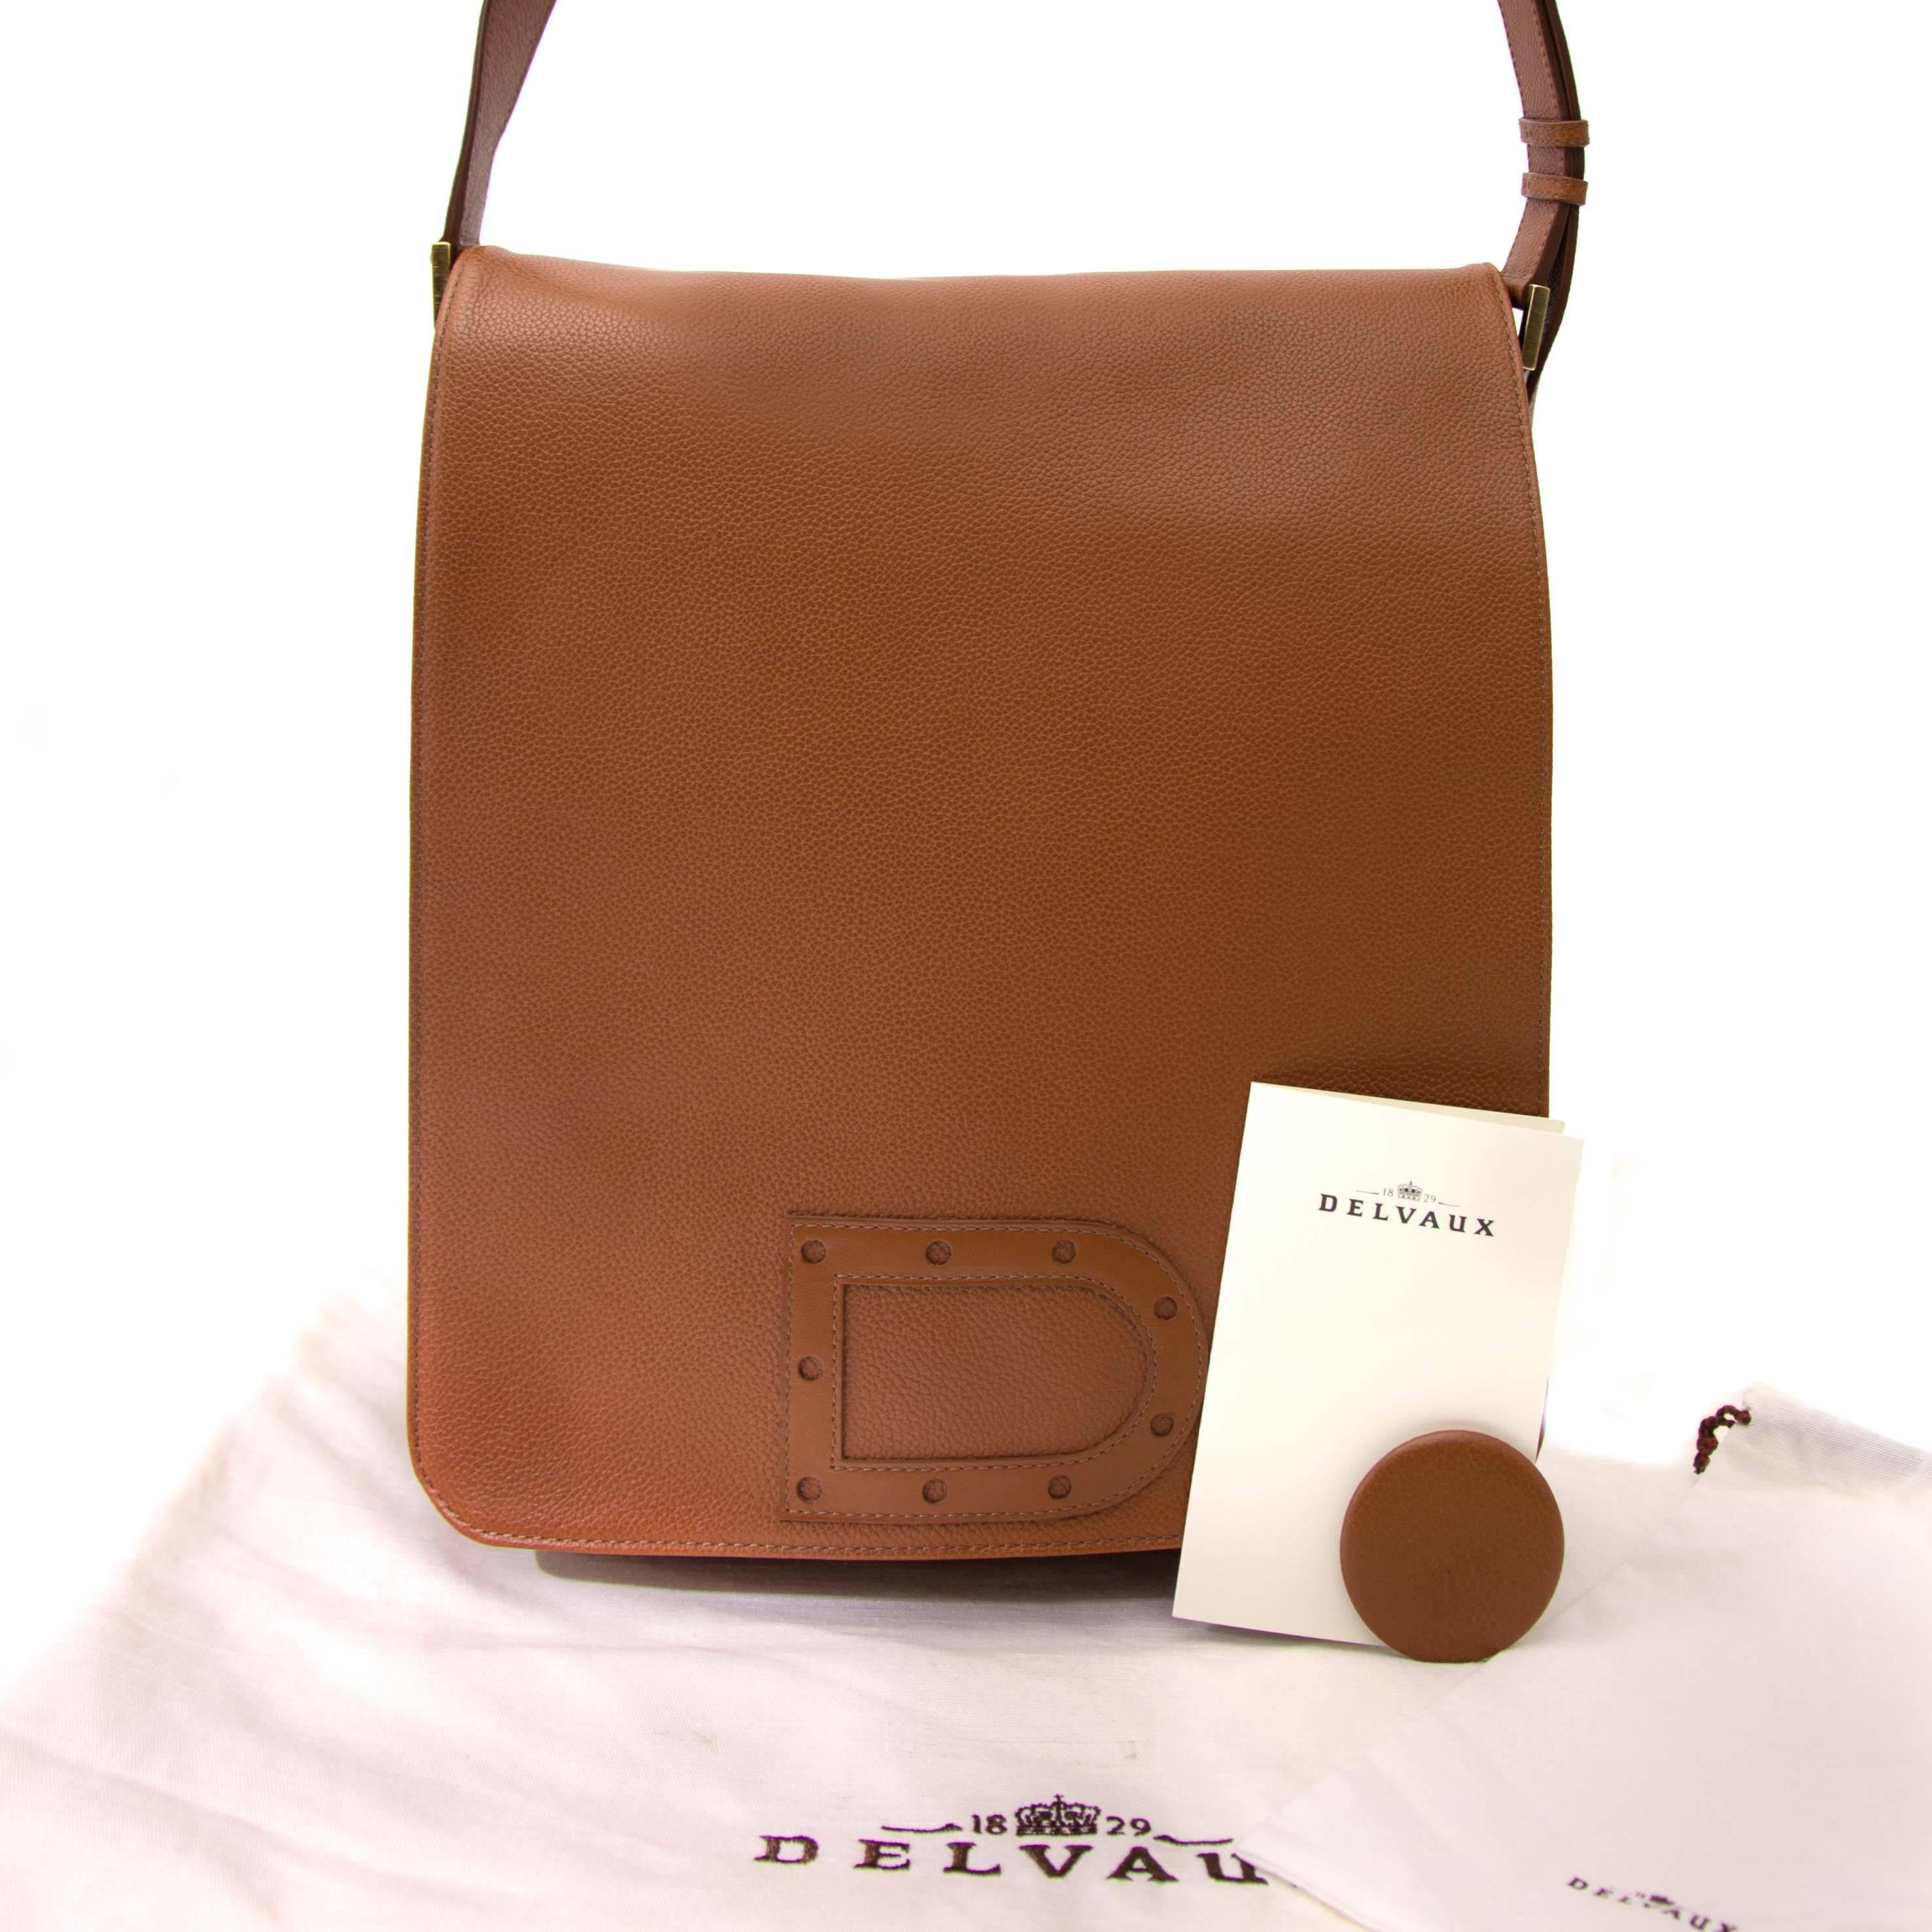 excellent condition

Delvaux Cognac Loiuse Baudrier Gm Shoulder Bag

Roam the world handsfree and as stylish as can be with this practical Cognac Delvaux Louise Shoulderbag
Its practical gm size is perfect for storing your daily essentials.
Fully